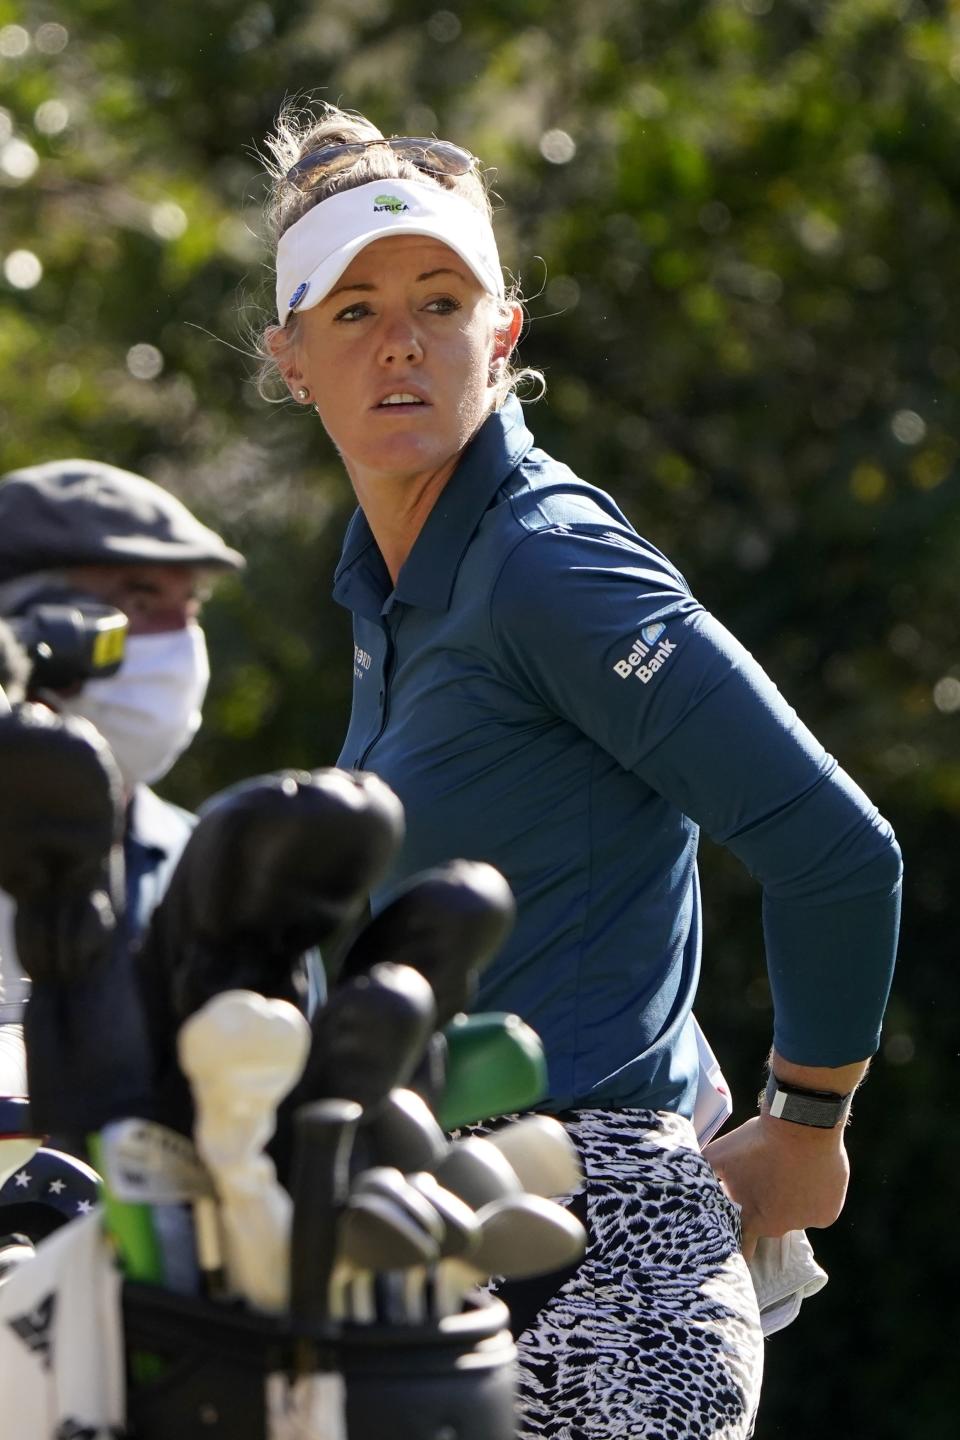 Amy Olson prepares to hit off the third tee during the first round of the U.S. Women's Open golf tournament in Houston, Thursday, Dec. 10, 2020. (AP Photo/Eric Gay)